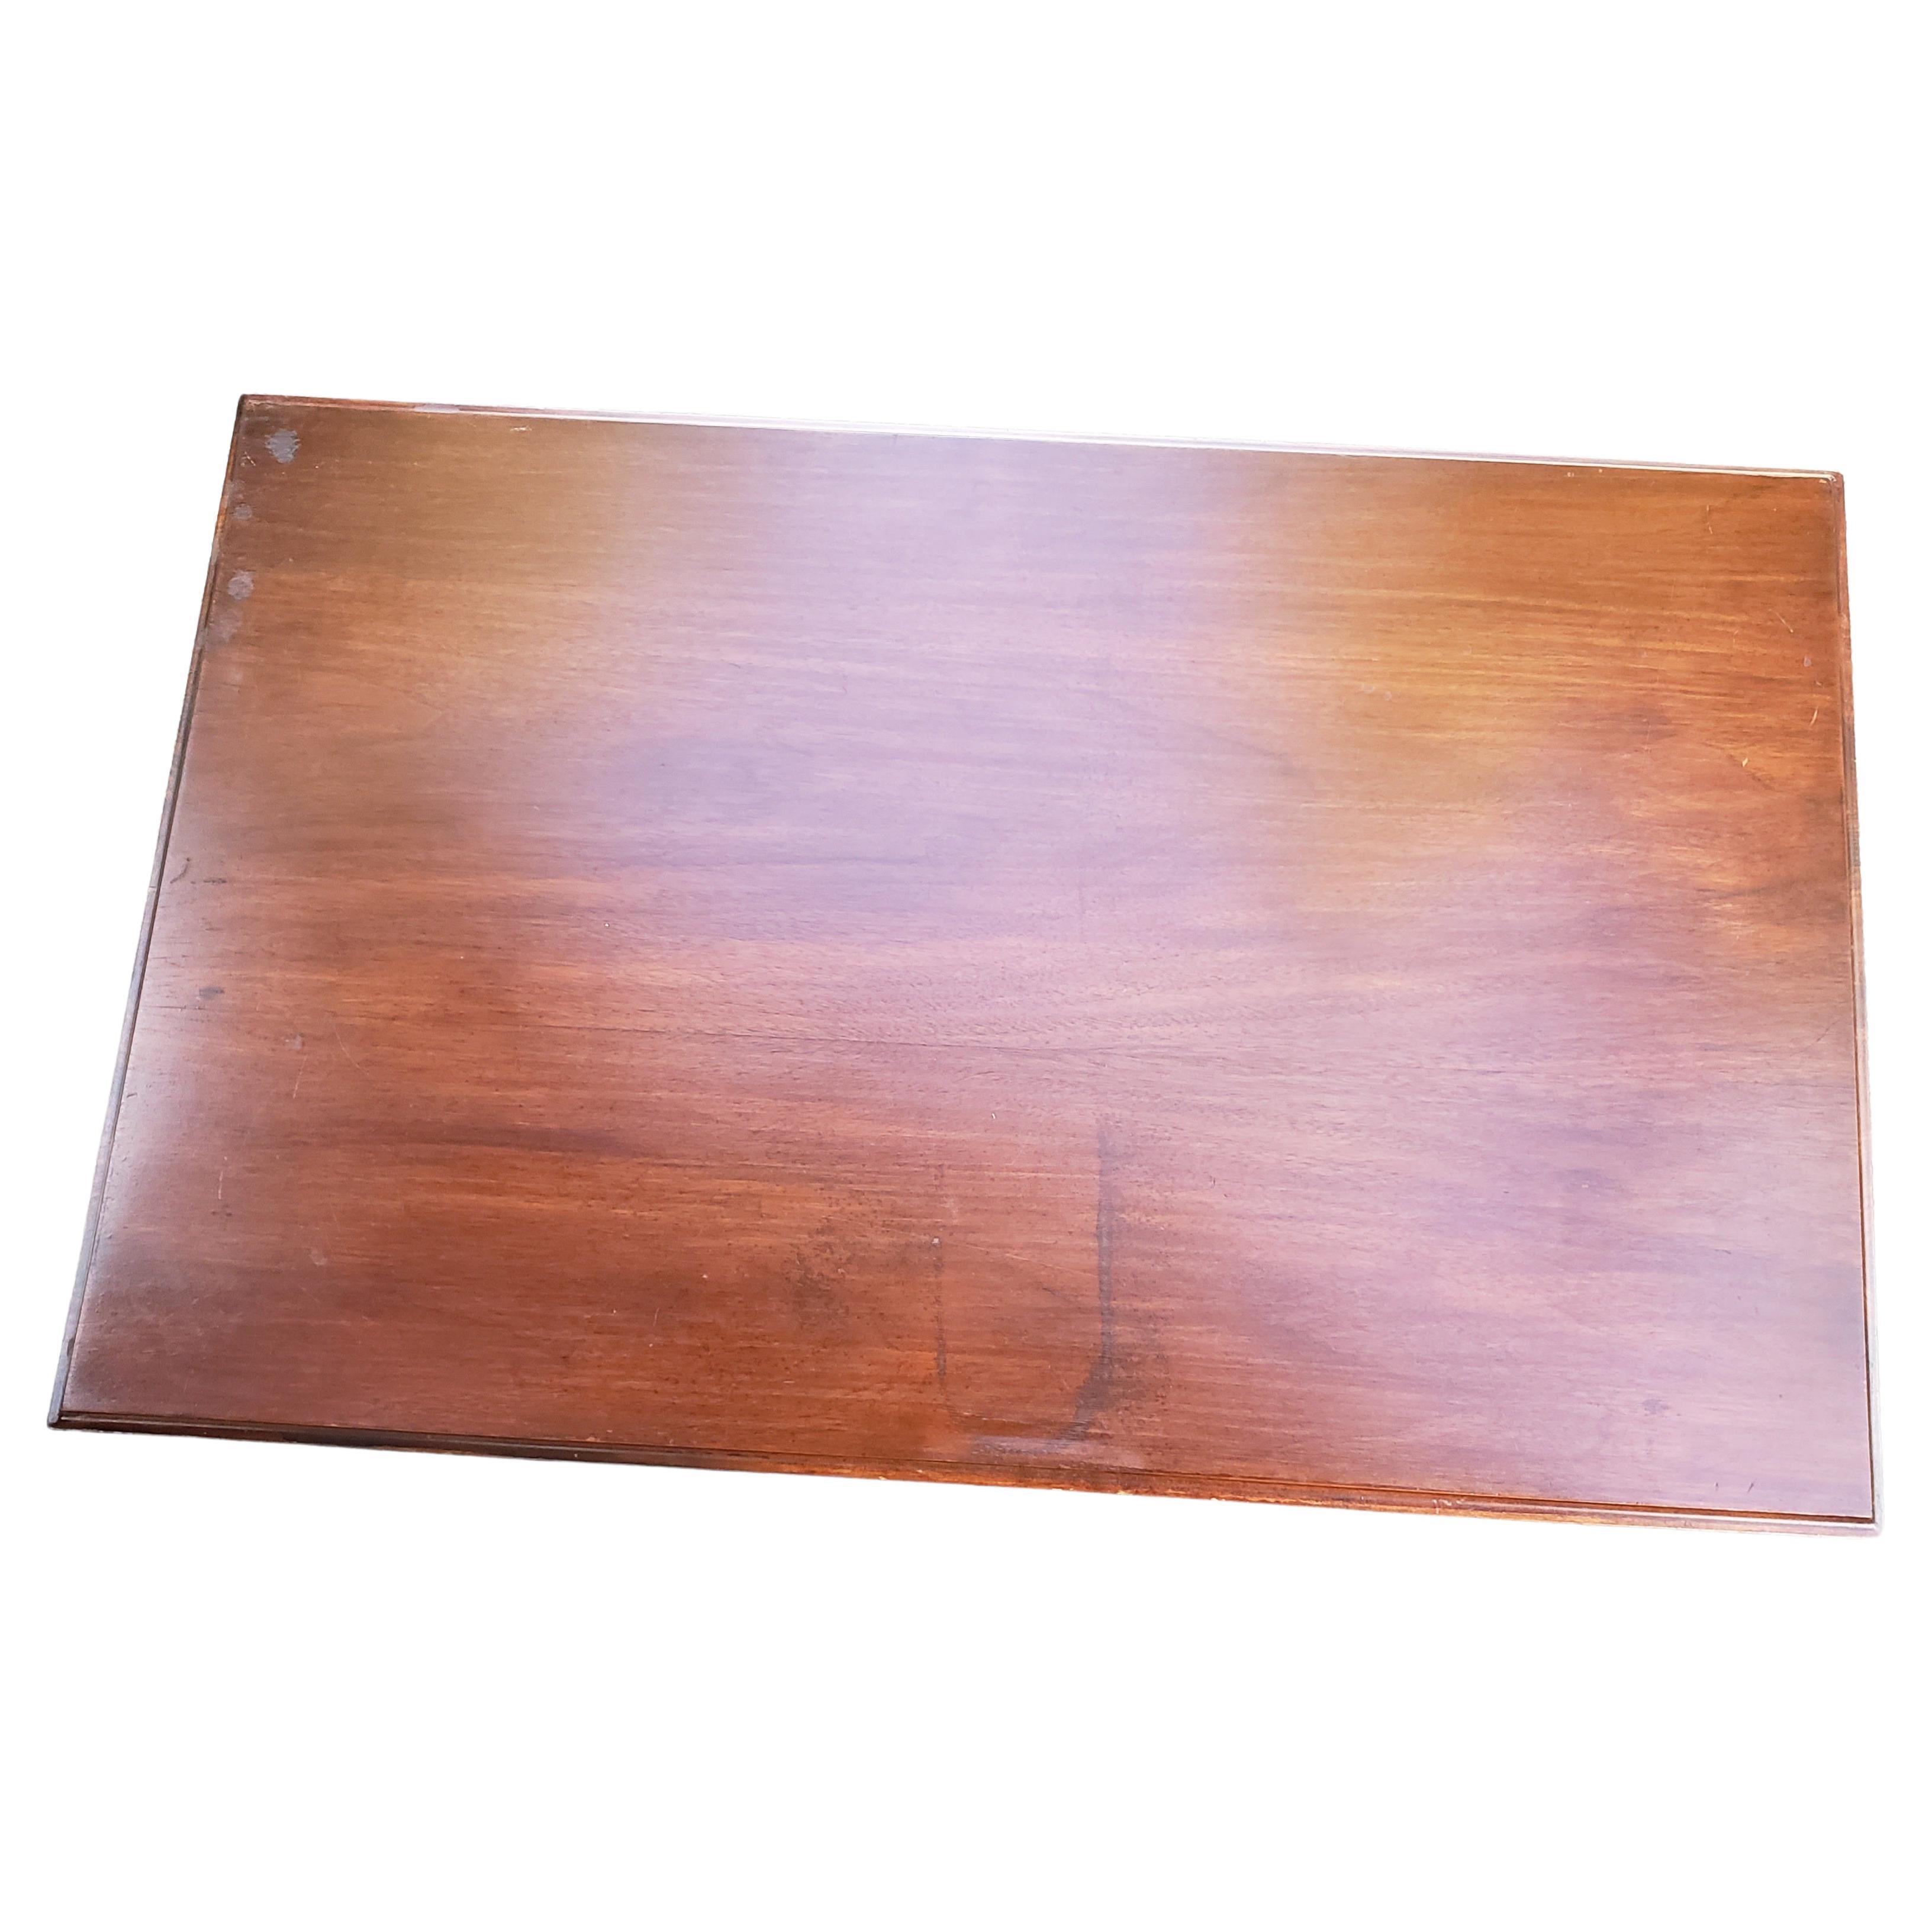 Woodwork Vintage Small Space American Mahogany Tea / Coffee Table, circa 1930s For Sale